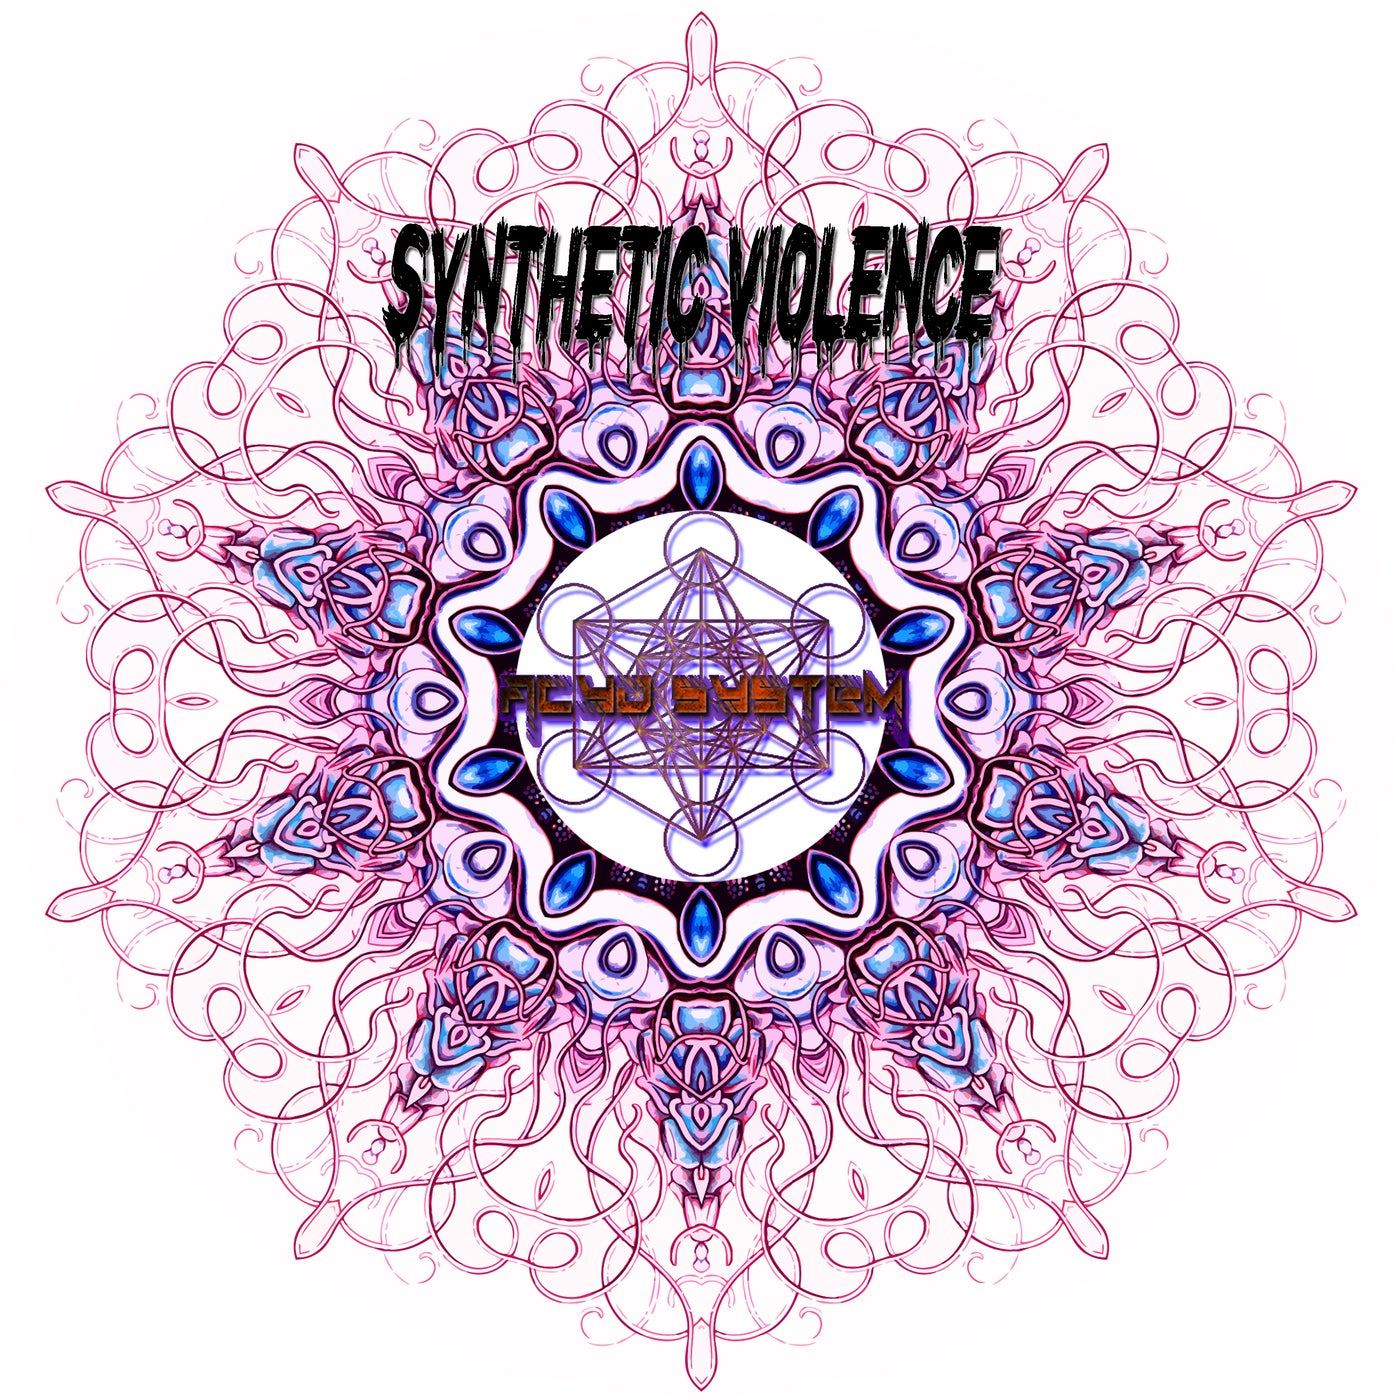 Synthetic Violence